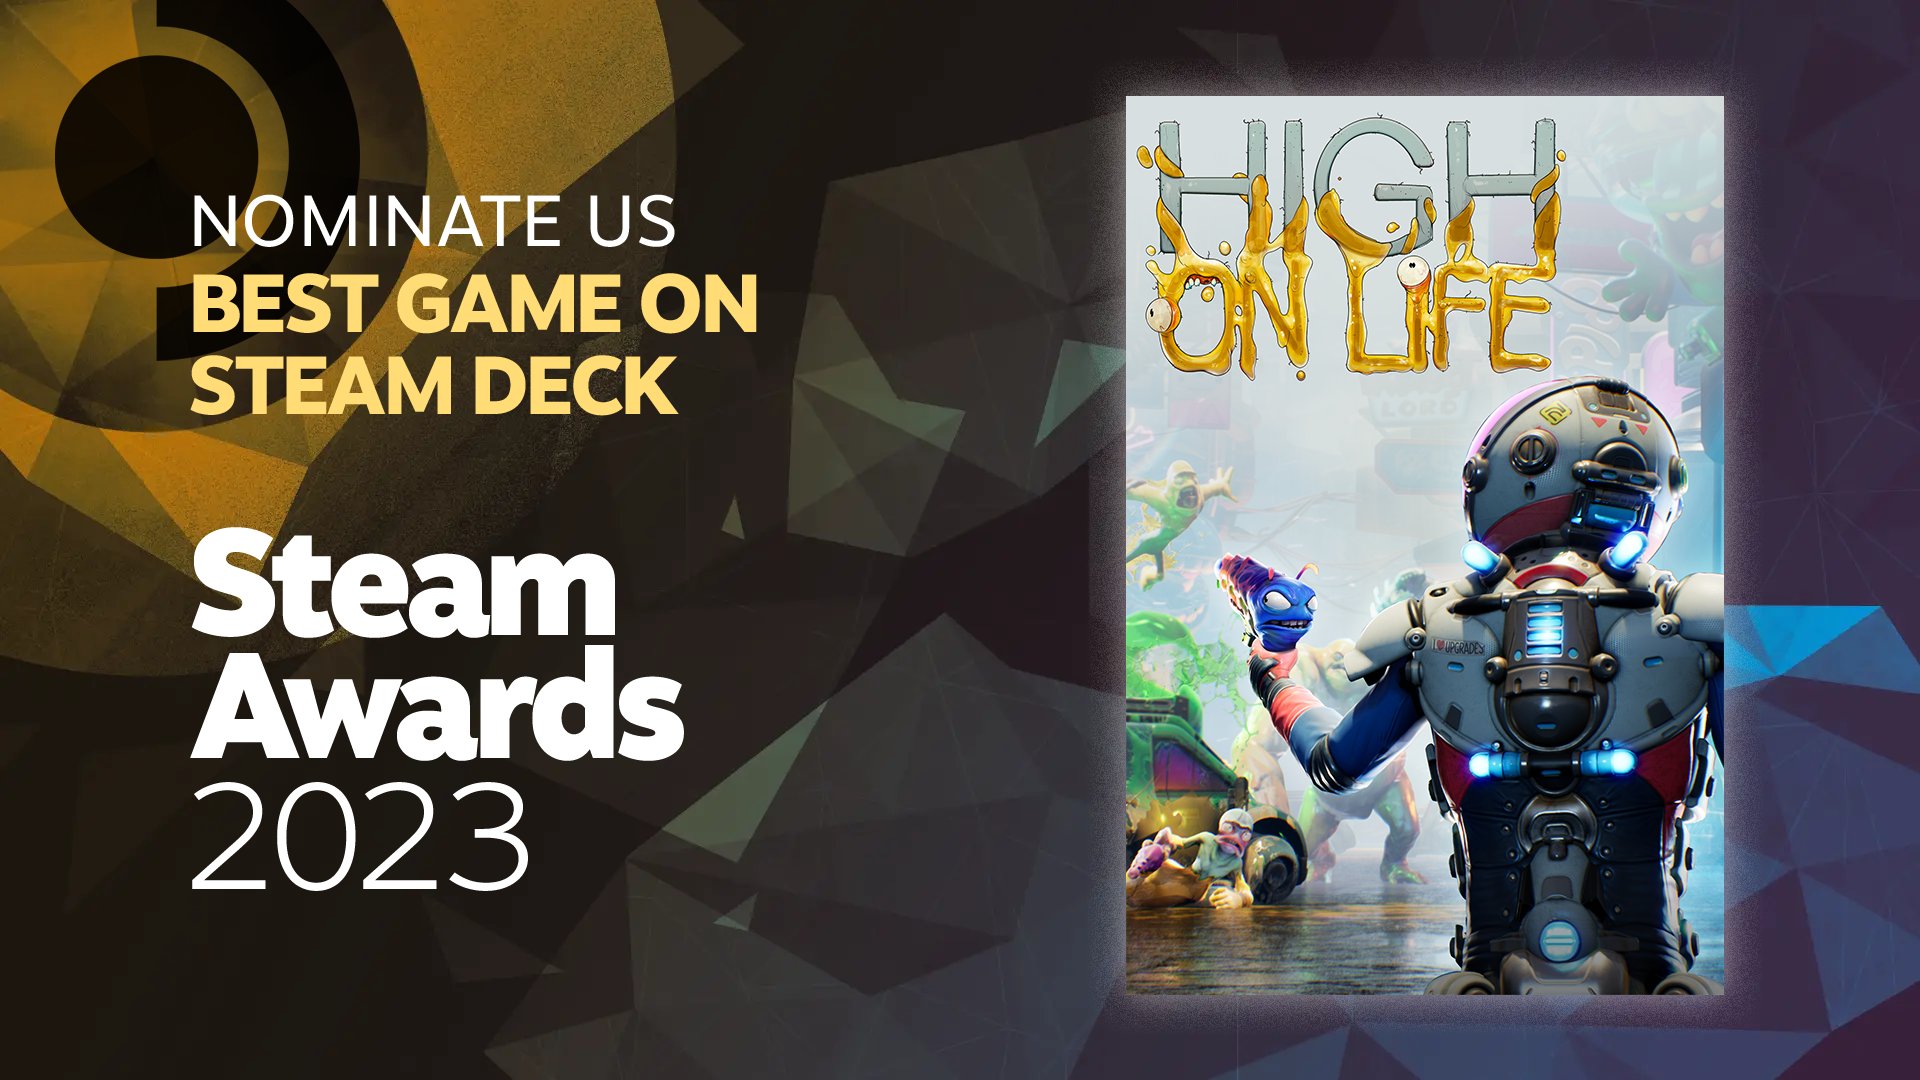 High On Life: High On Knife system requirements